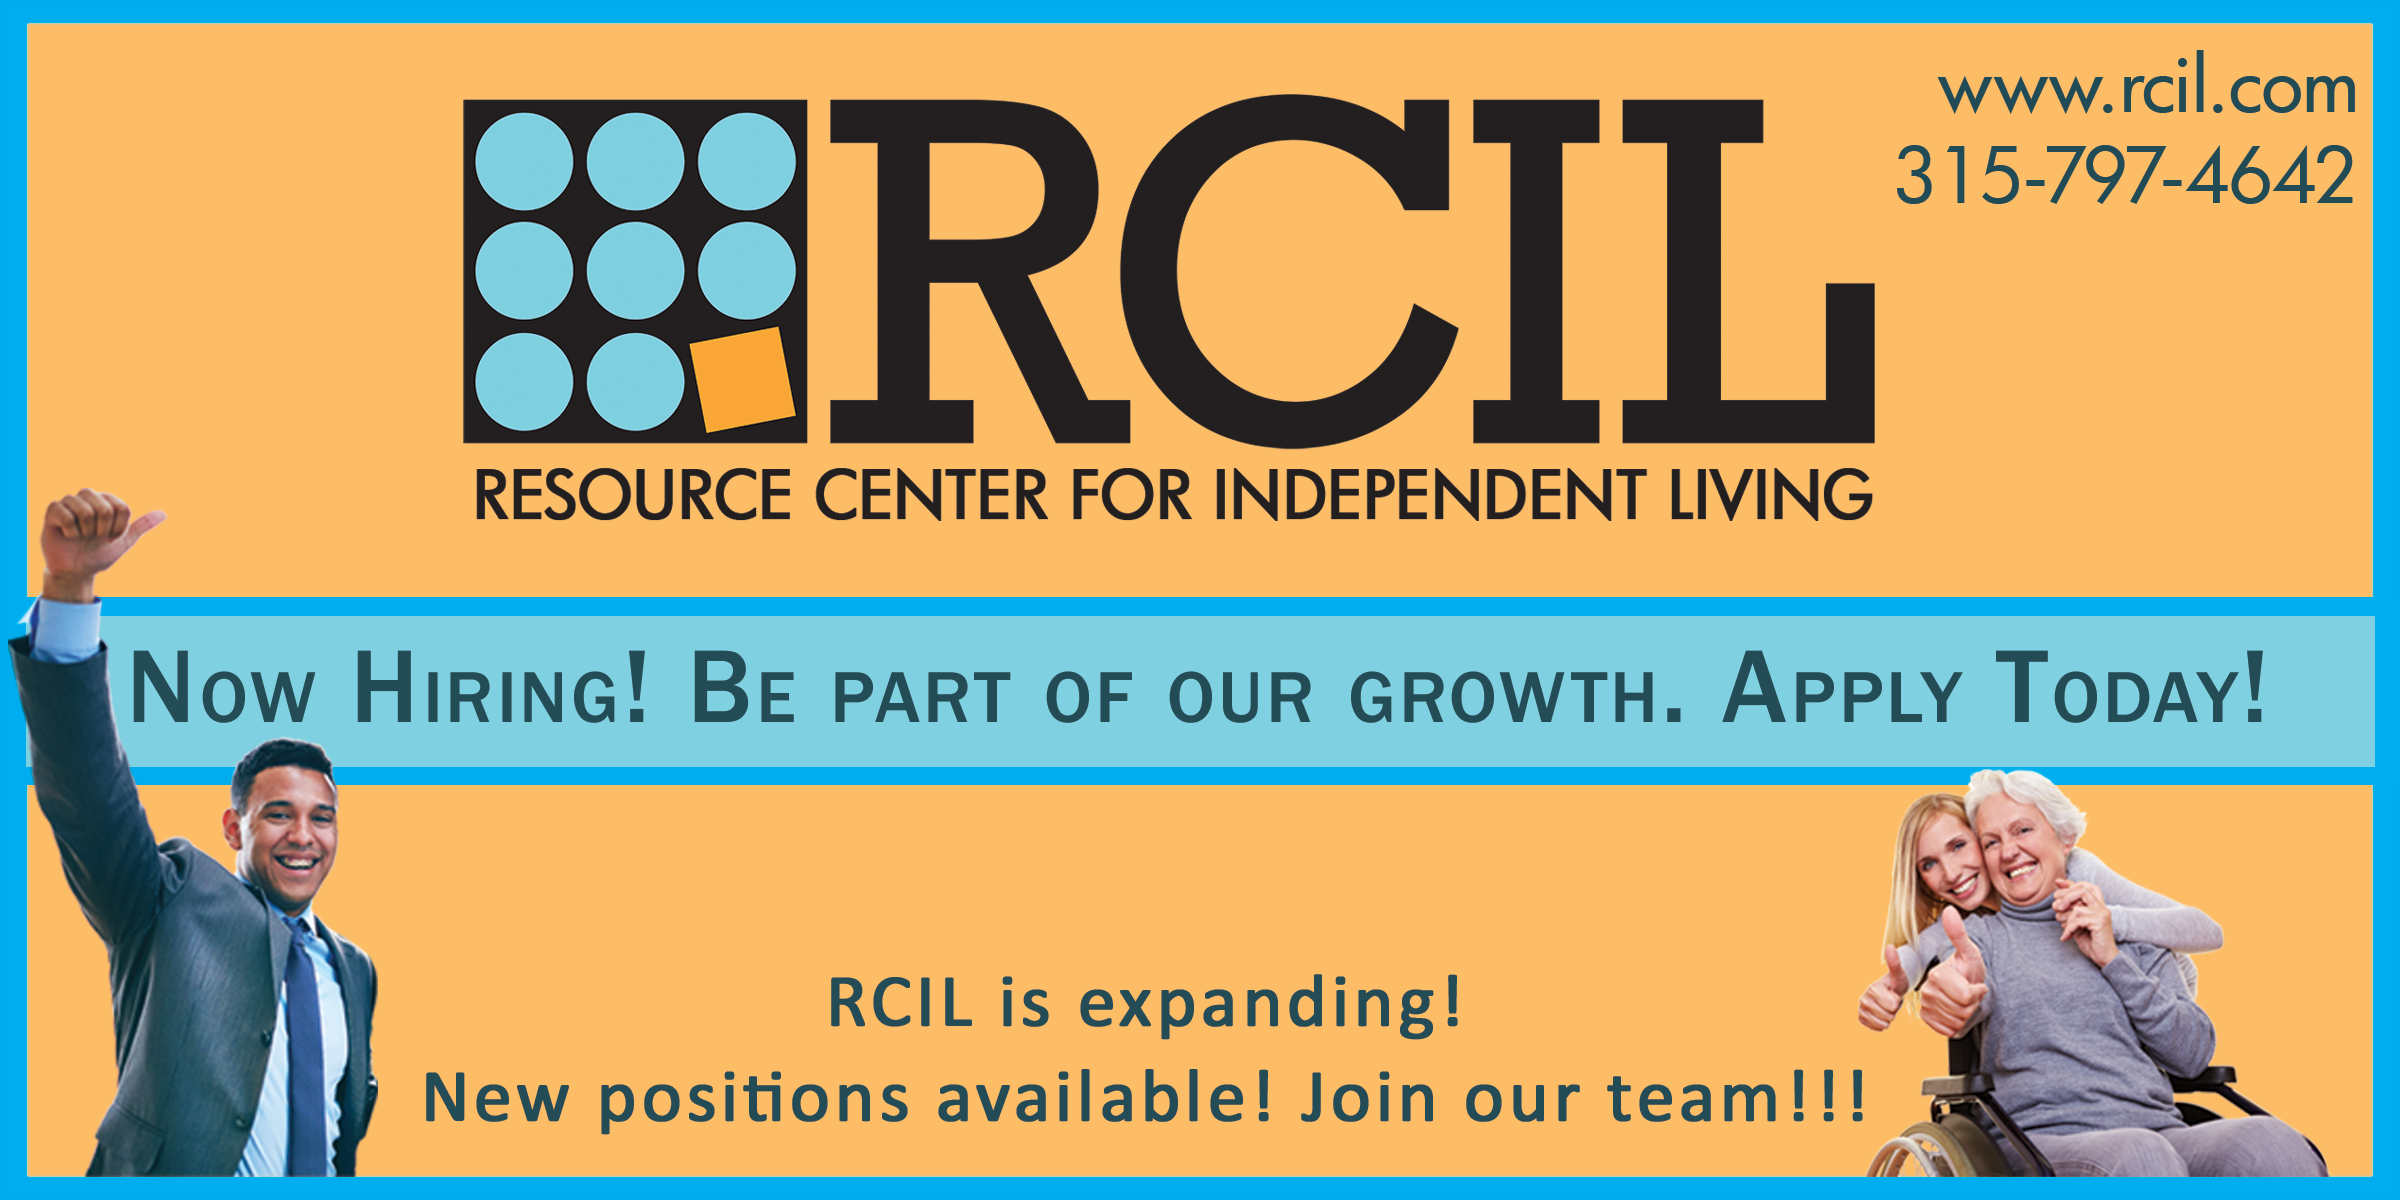 RCIL is now hiring! Be part of our growth. Click here to apply today